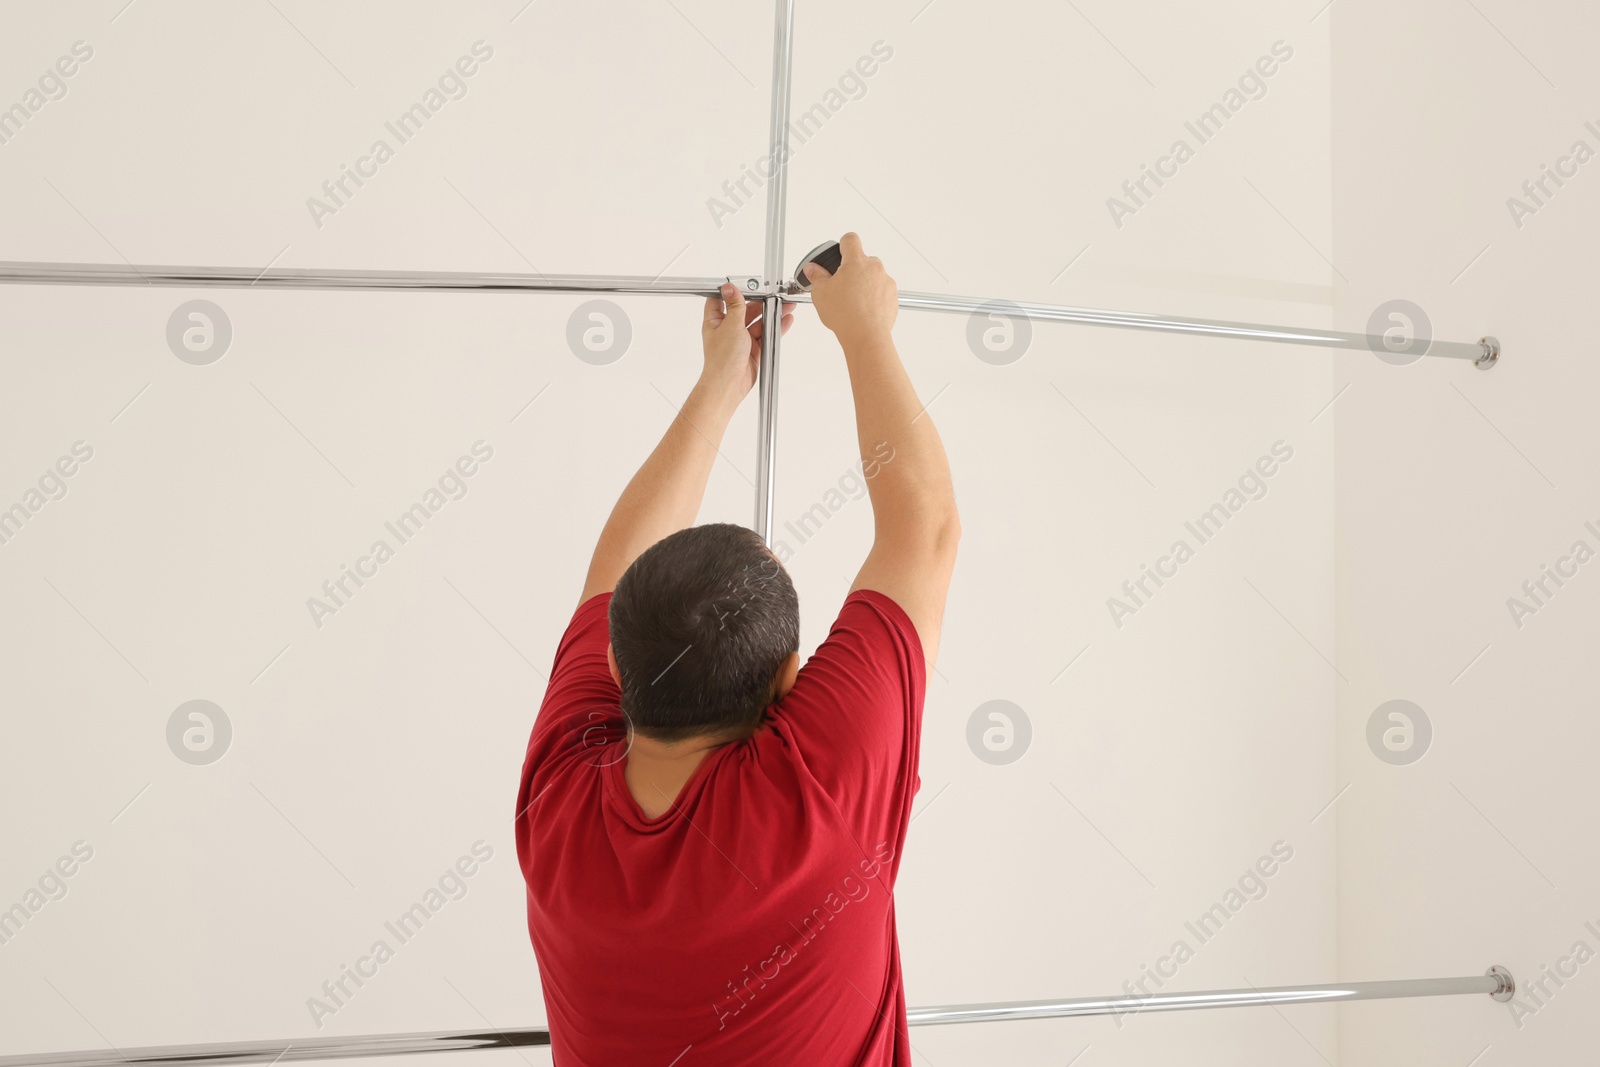 Photo of Worker installing new metal pipes indoors, back view